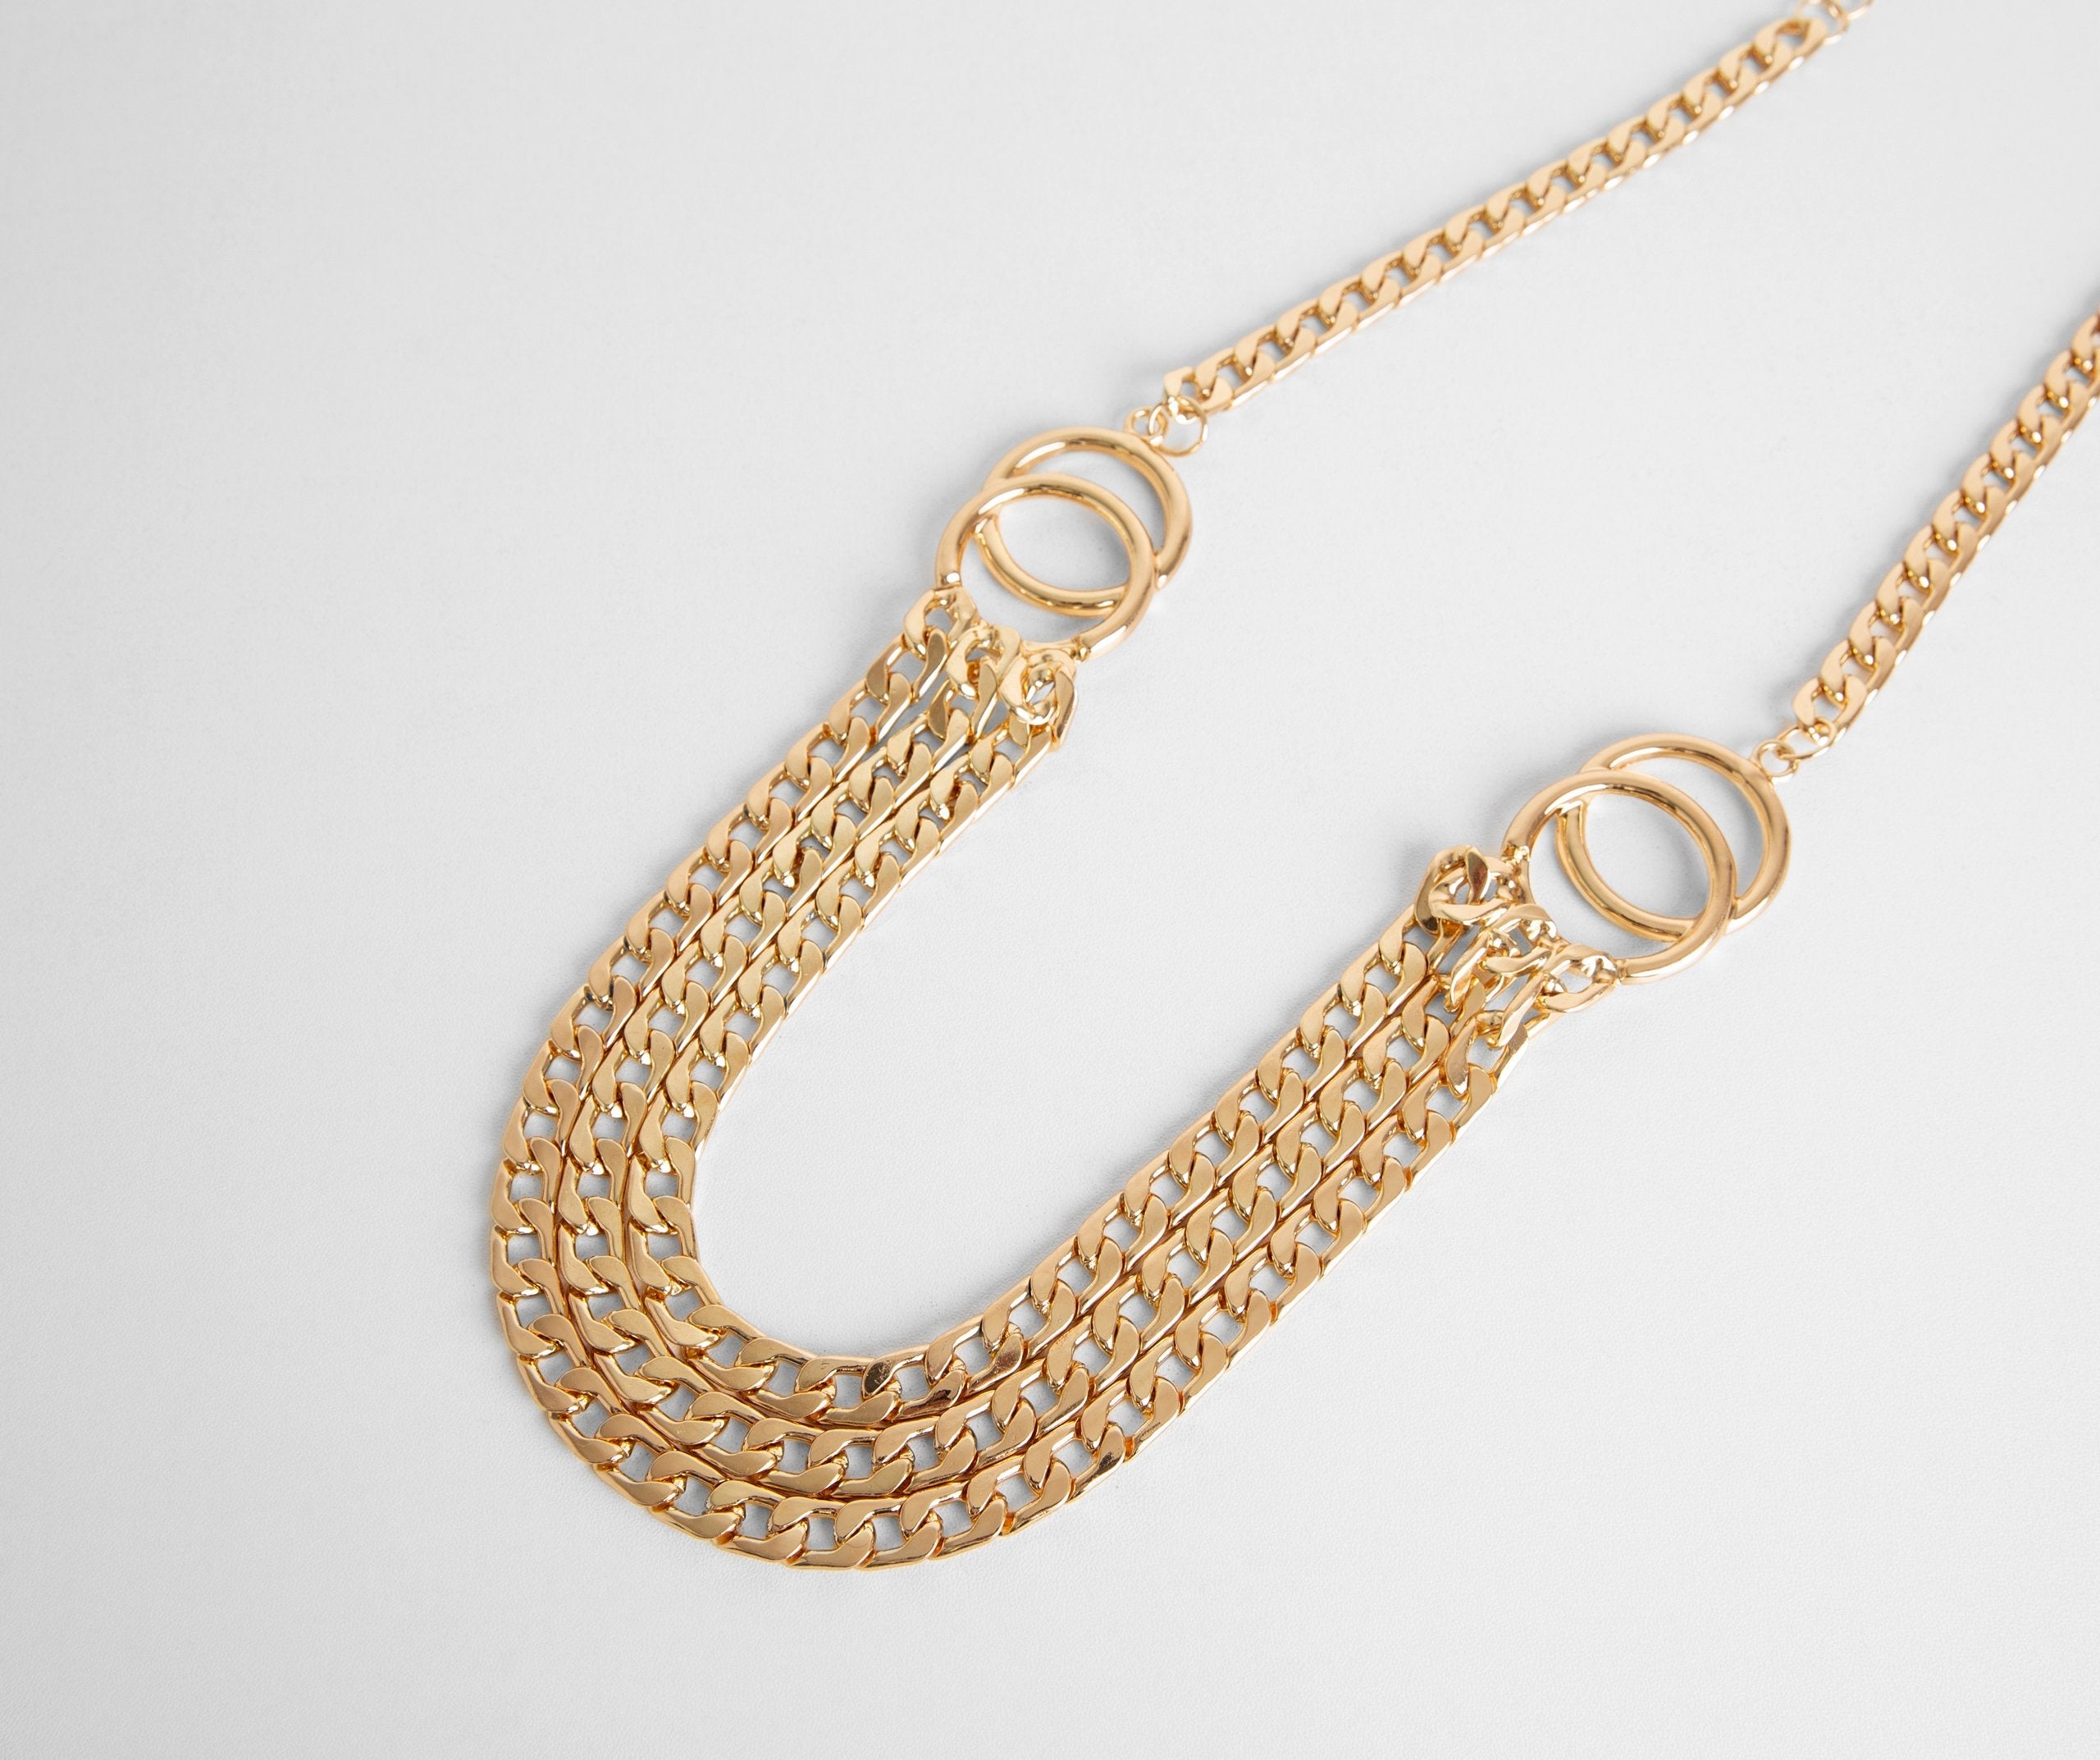 Triple Threat Layered Chain Swag Belt - Lady Occasions